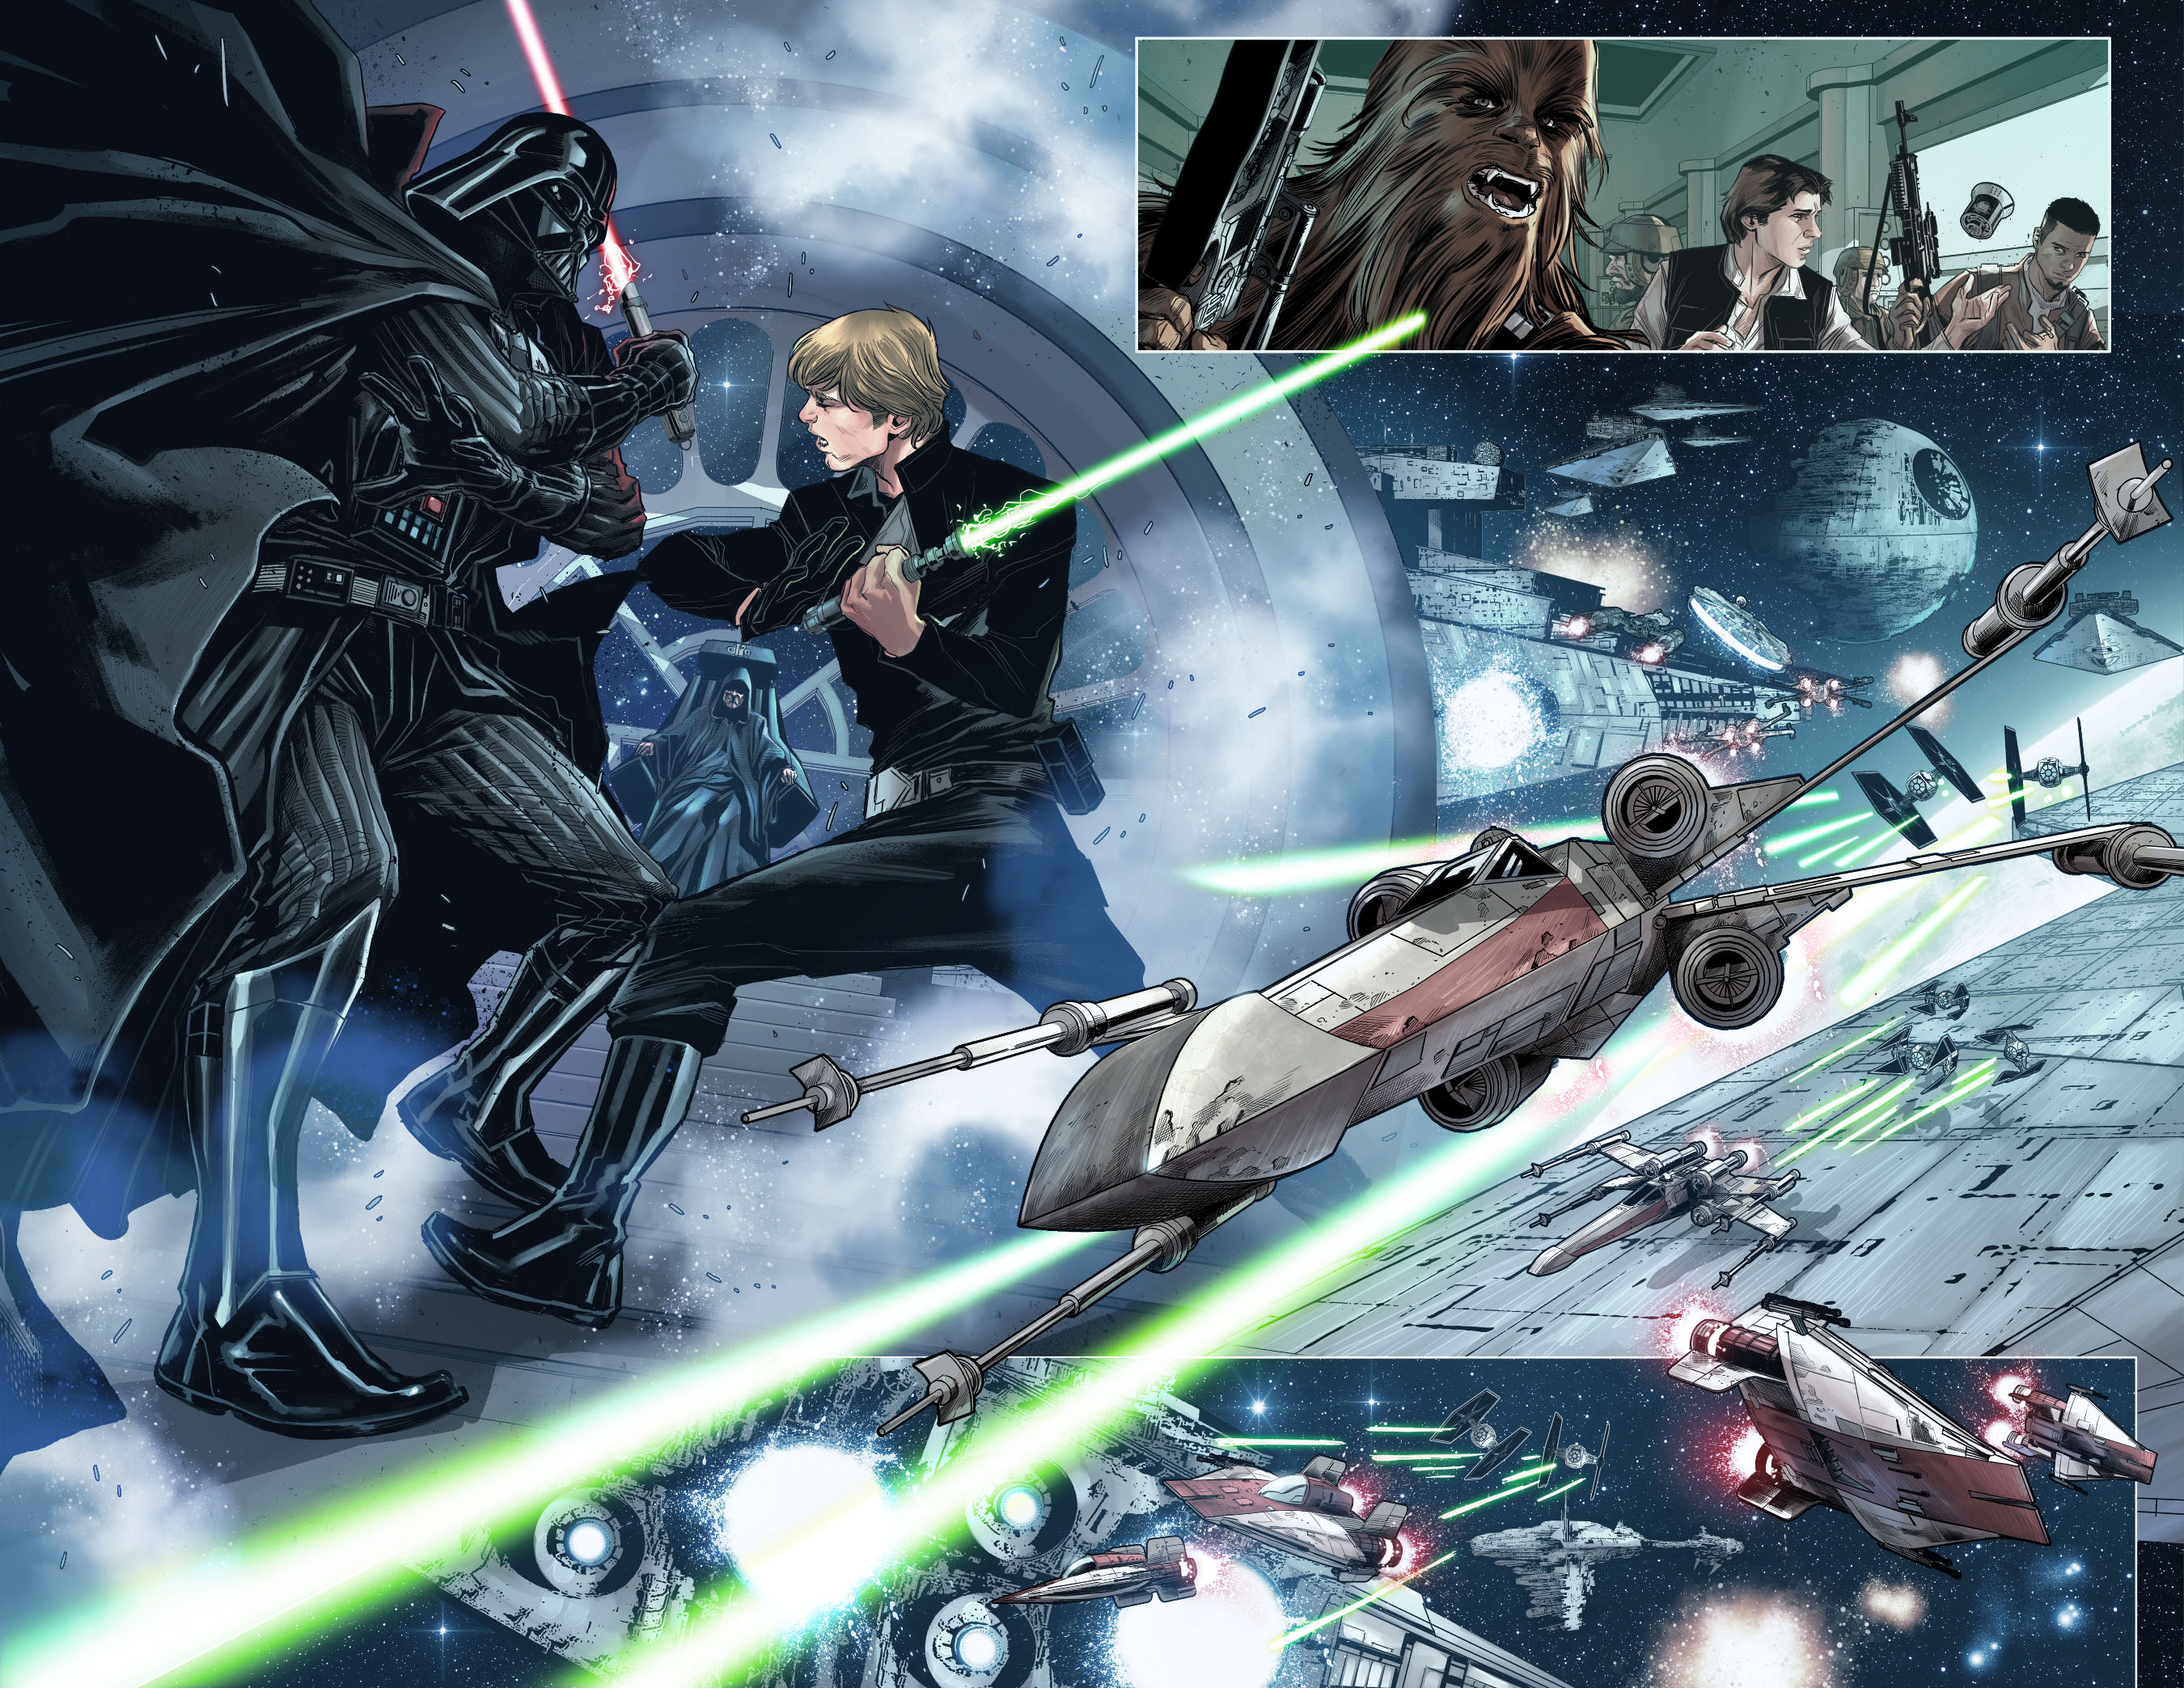 In 'Shattered Empire #1' (2015), the struggle of the Rebel Alliance against the Empire.